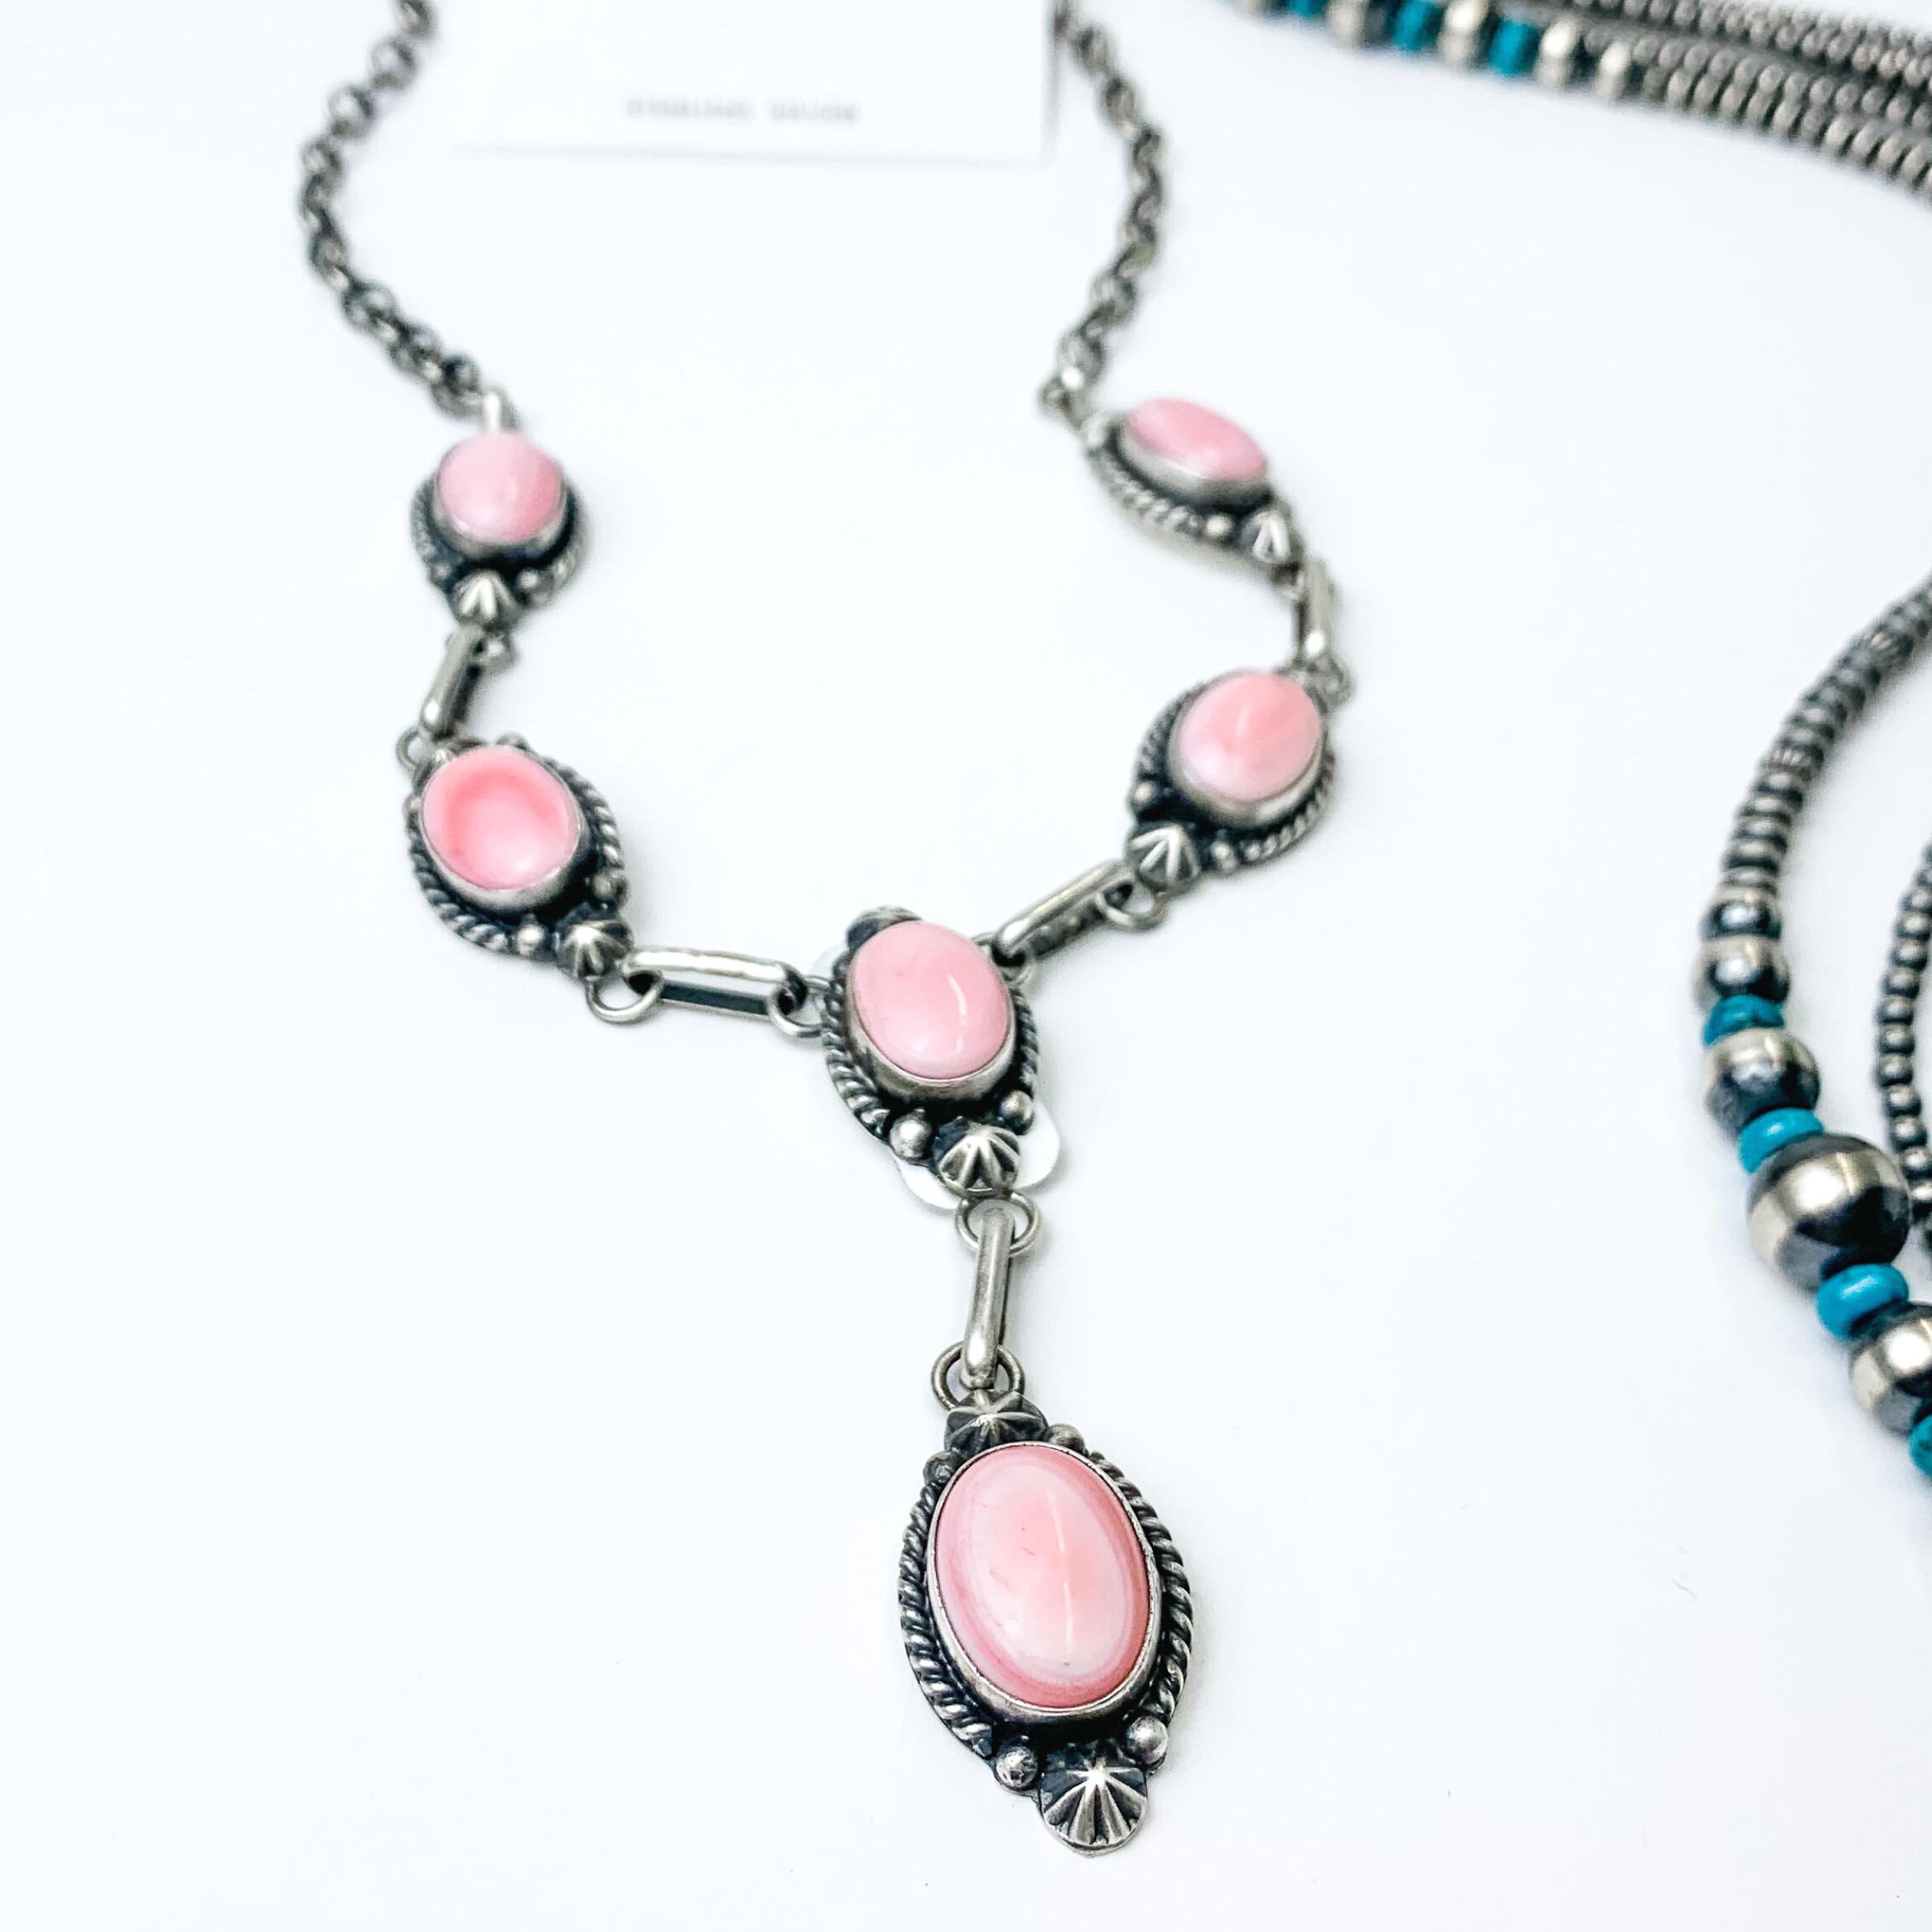 Donovan Skeets | Navajo Handmade Sterling Silver & Pink Conch Stones Lariat Necklace + Matching Earrings - Giddy Up Glamour Boutique